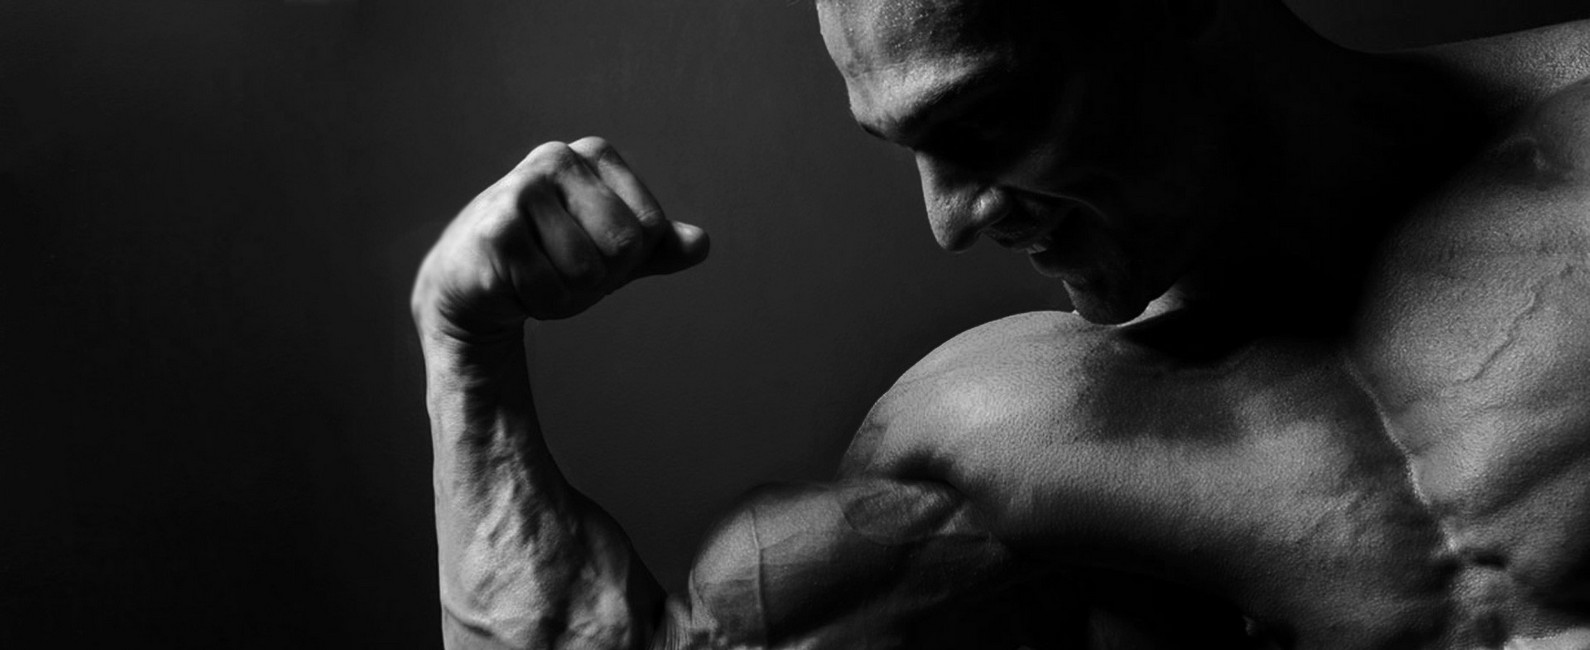 Buy steroids from poland online